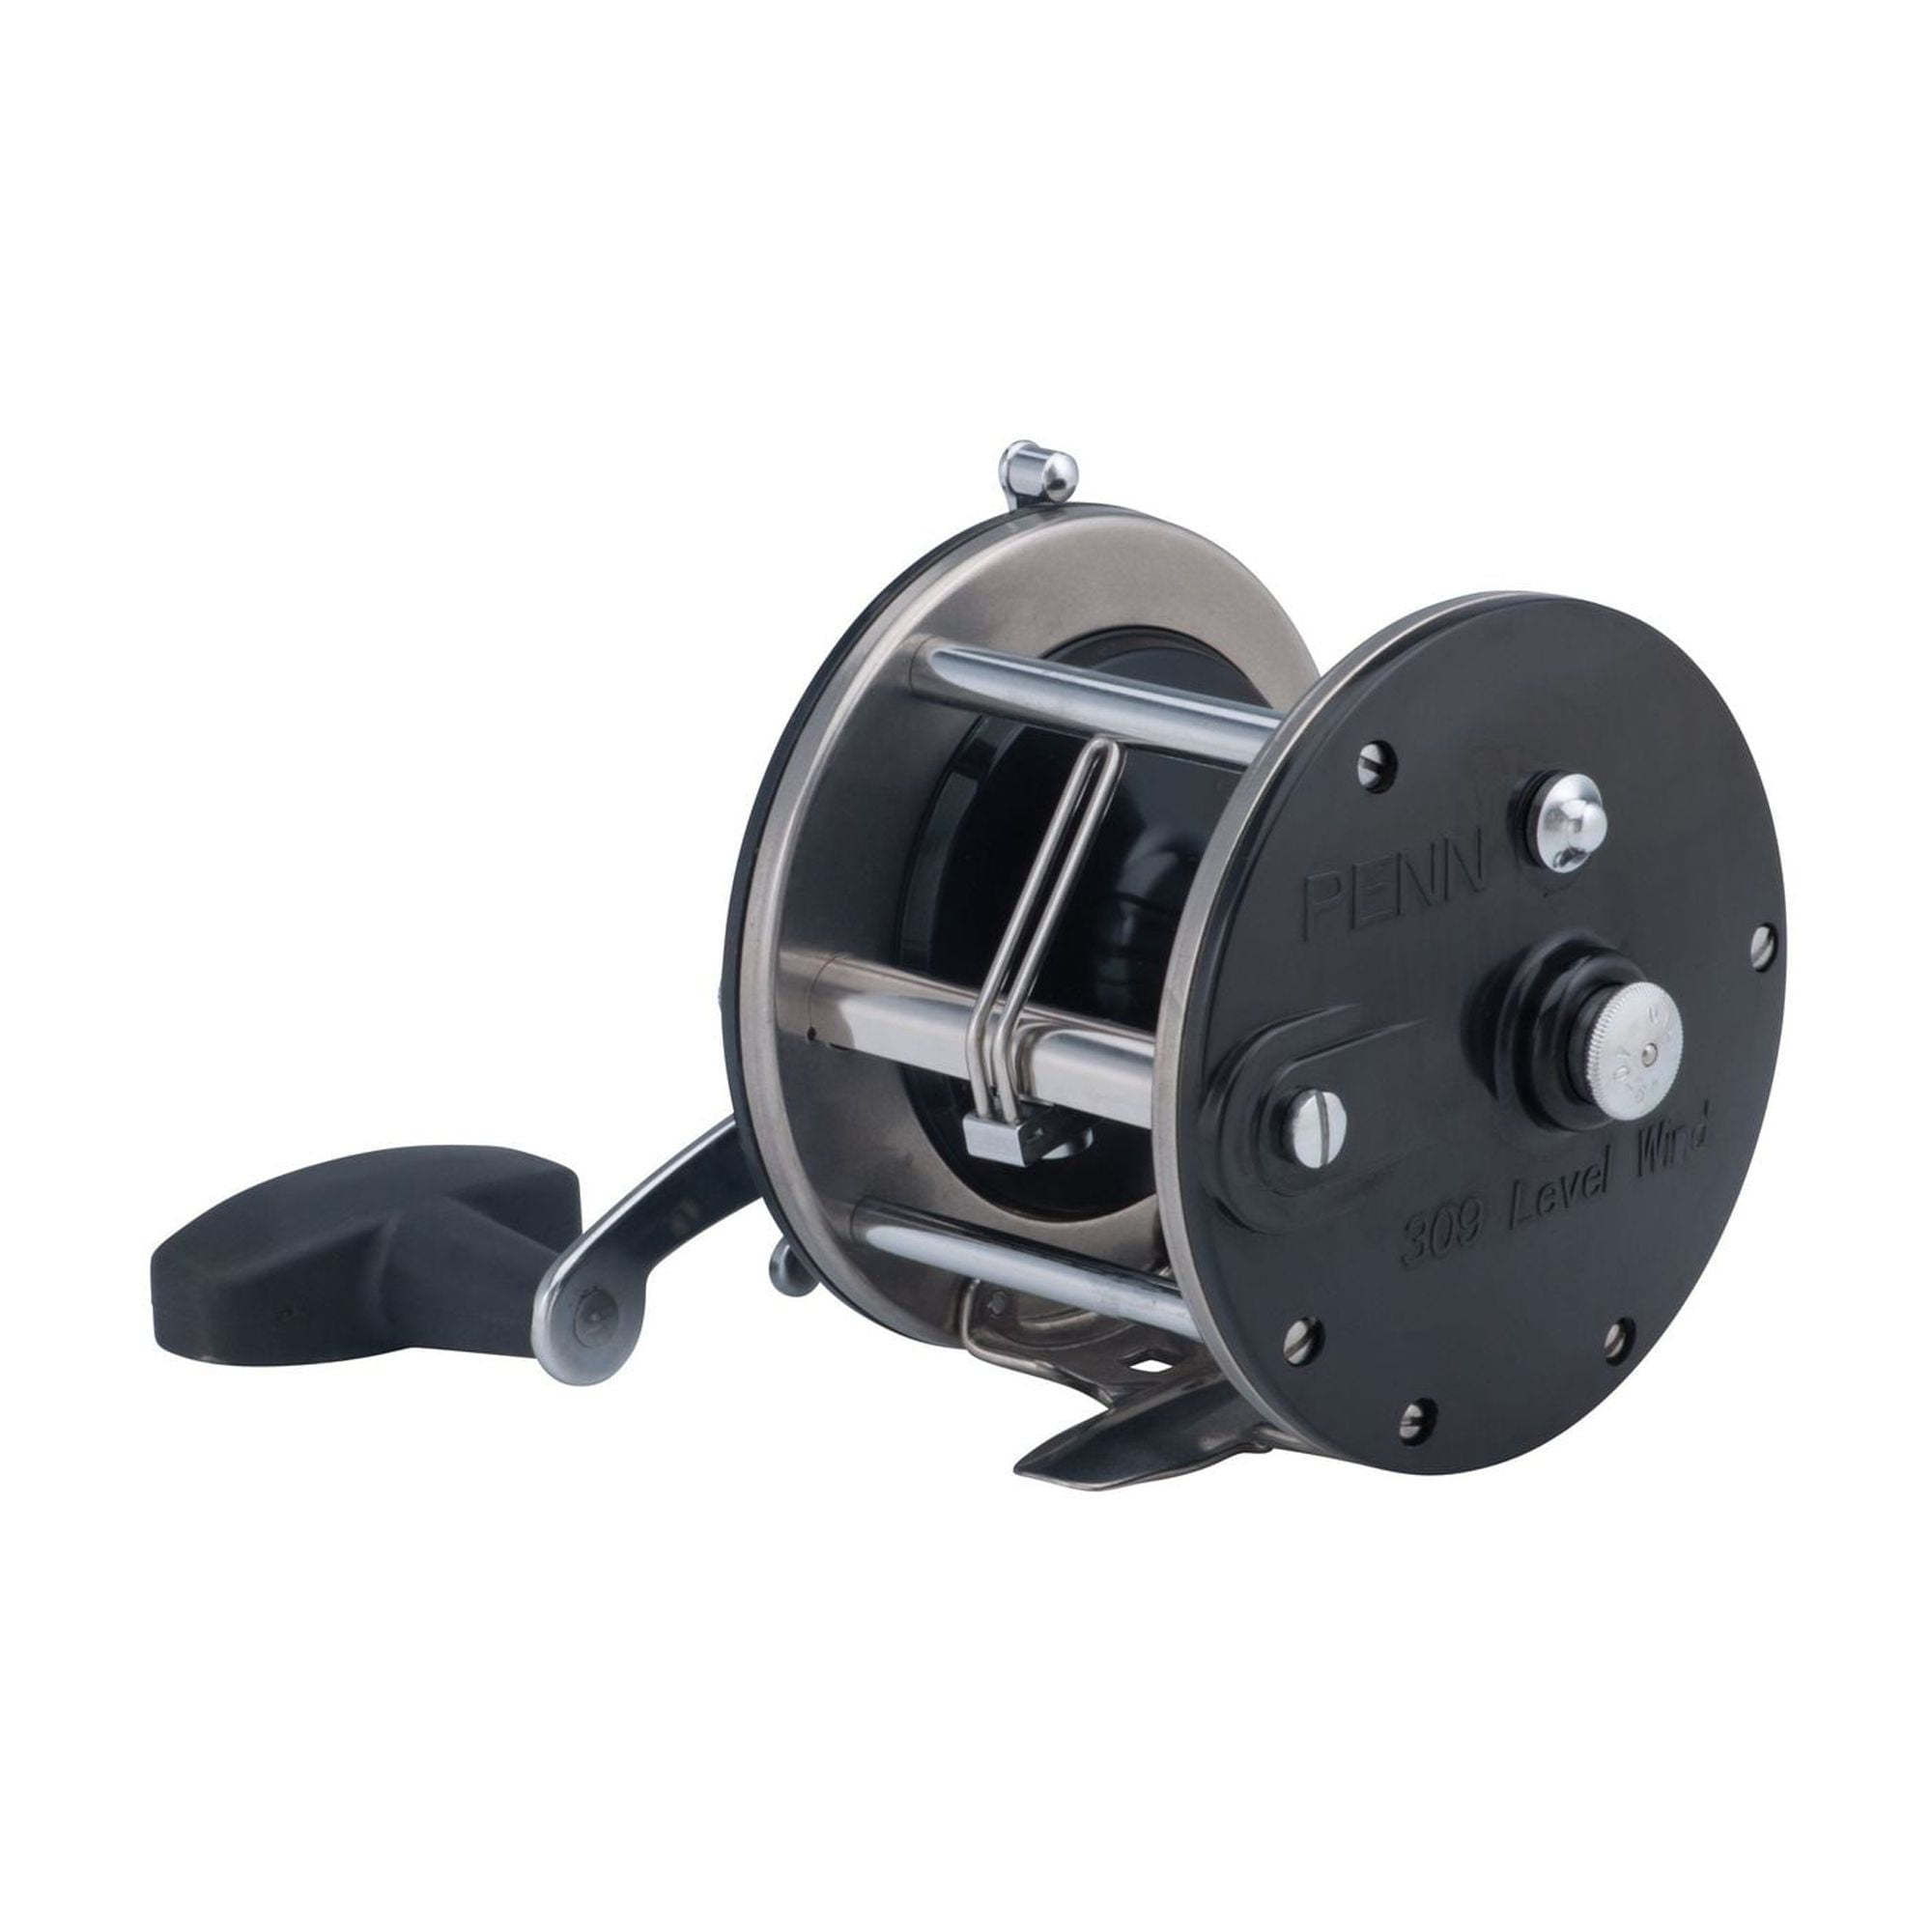 Penn 6-309 a_Fiber Washer Model 309 - Rods1 Fishing Reels and Reel Parts.